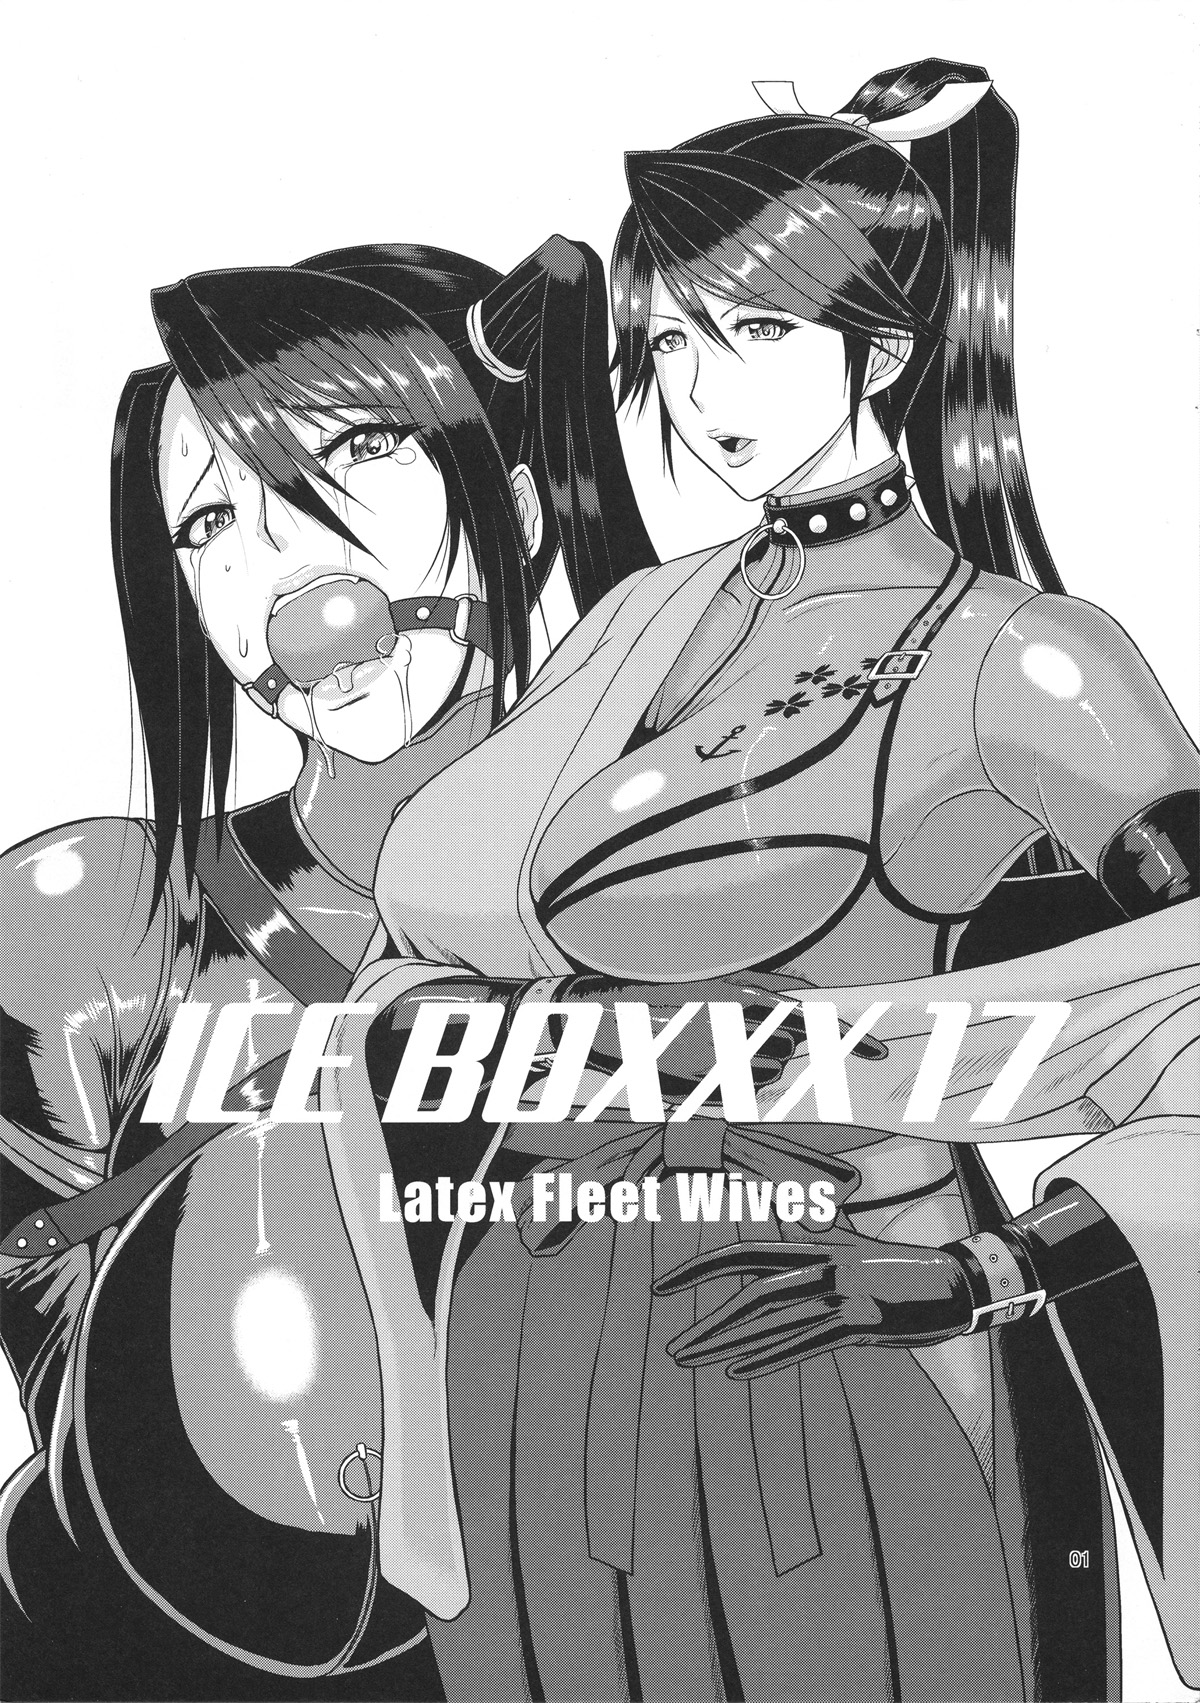 (CT27) [SERIOUS GRAPHICS (ICE)] ICE BOXXX 17 Latex Fleet Wives (Kantai Collection -KanColle-) [Chinese] [管少女汉化] page 2 full